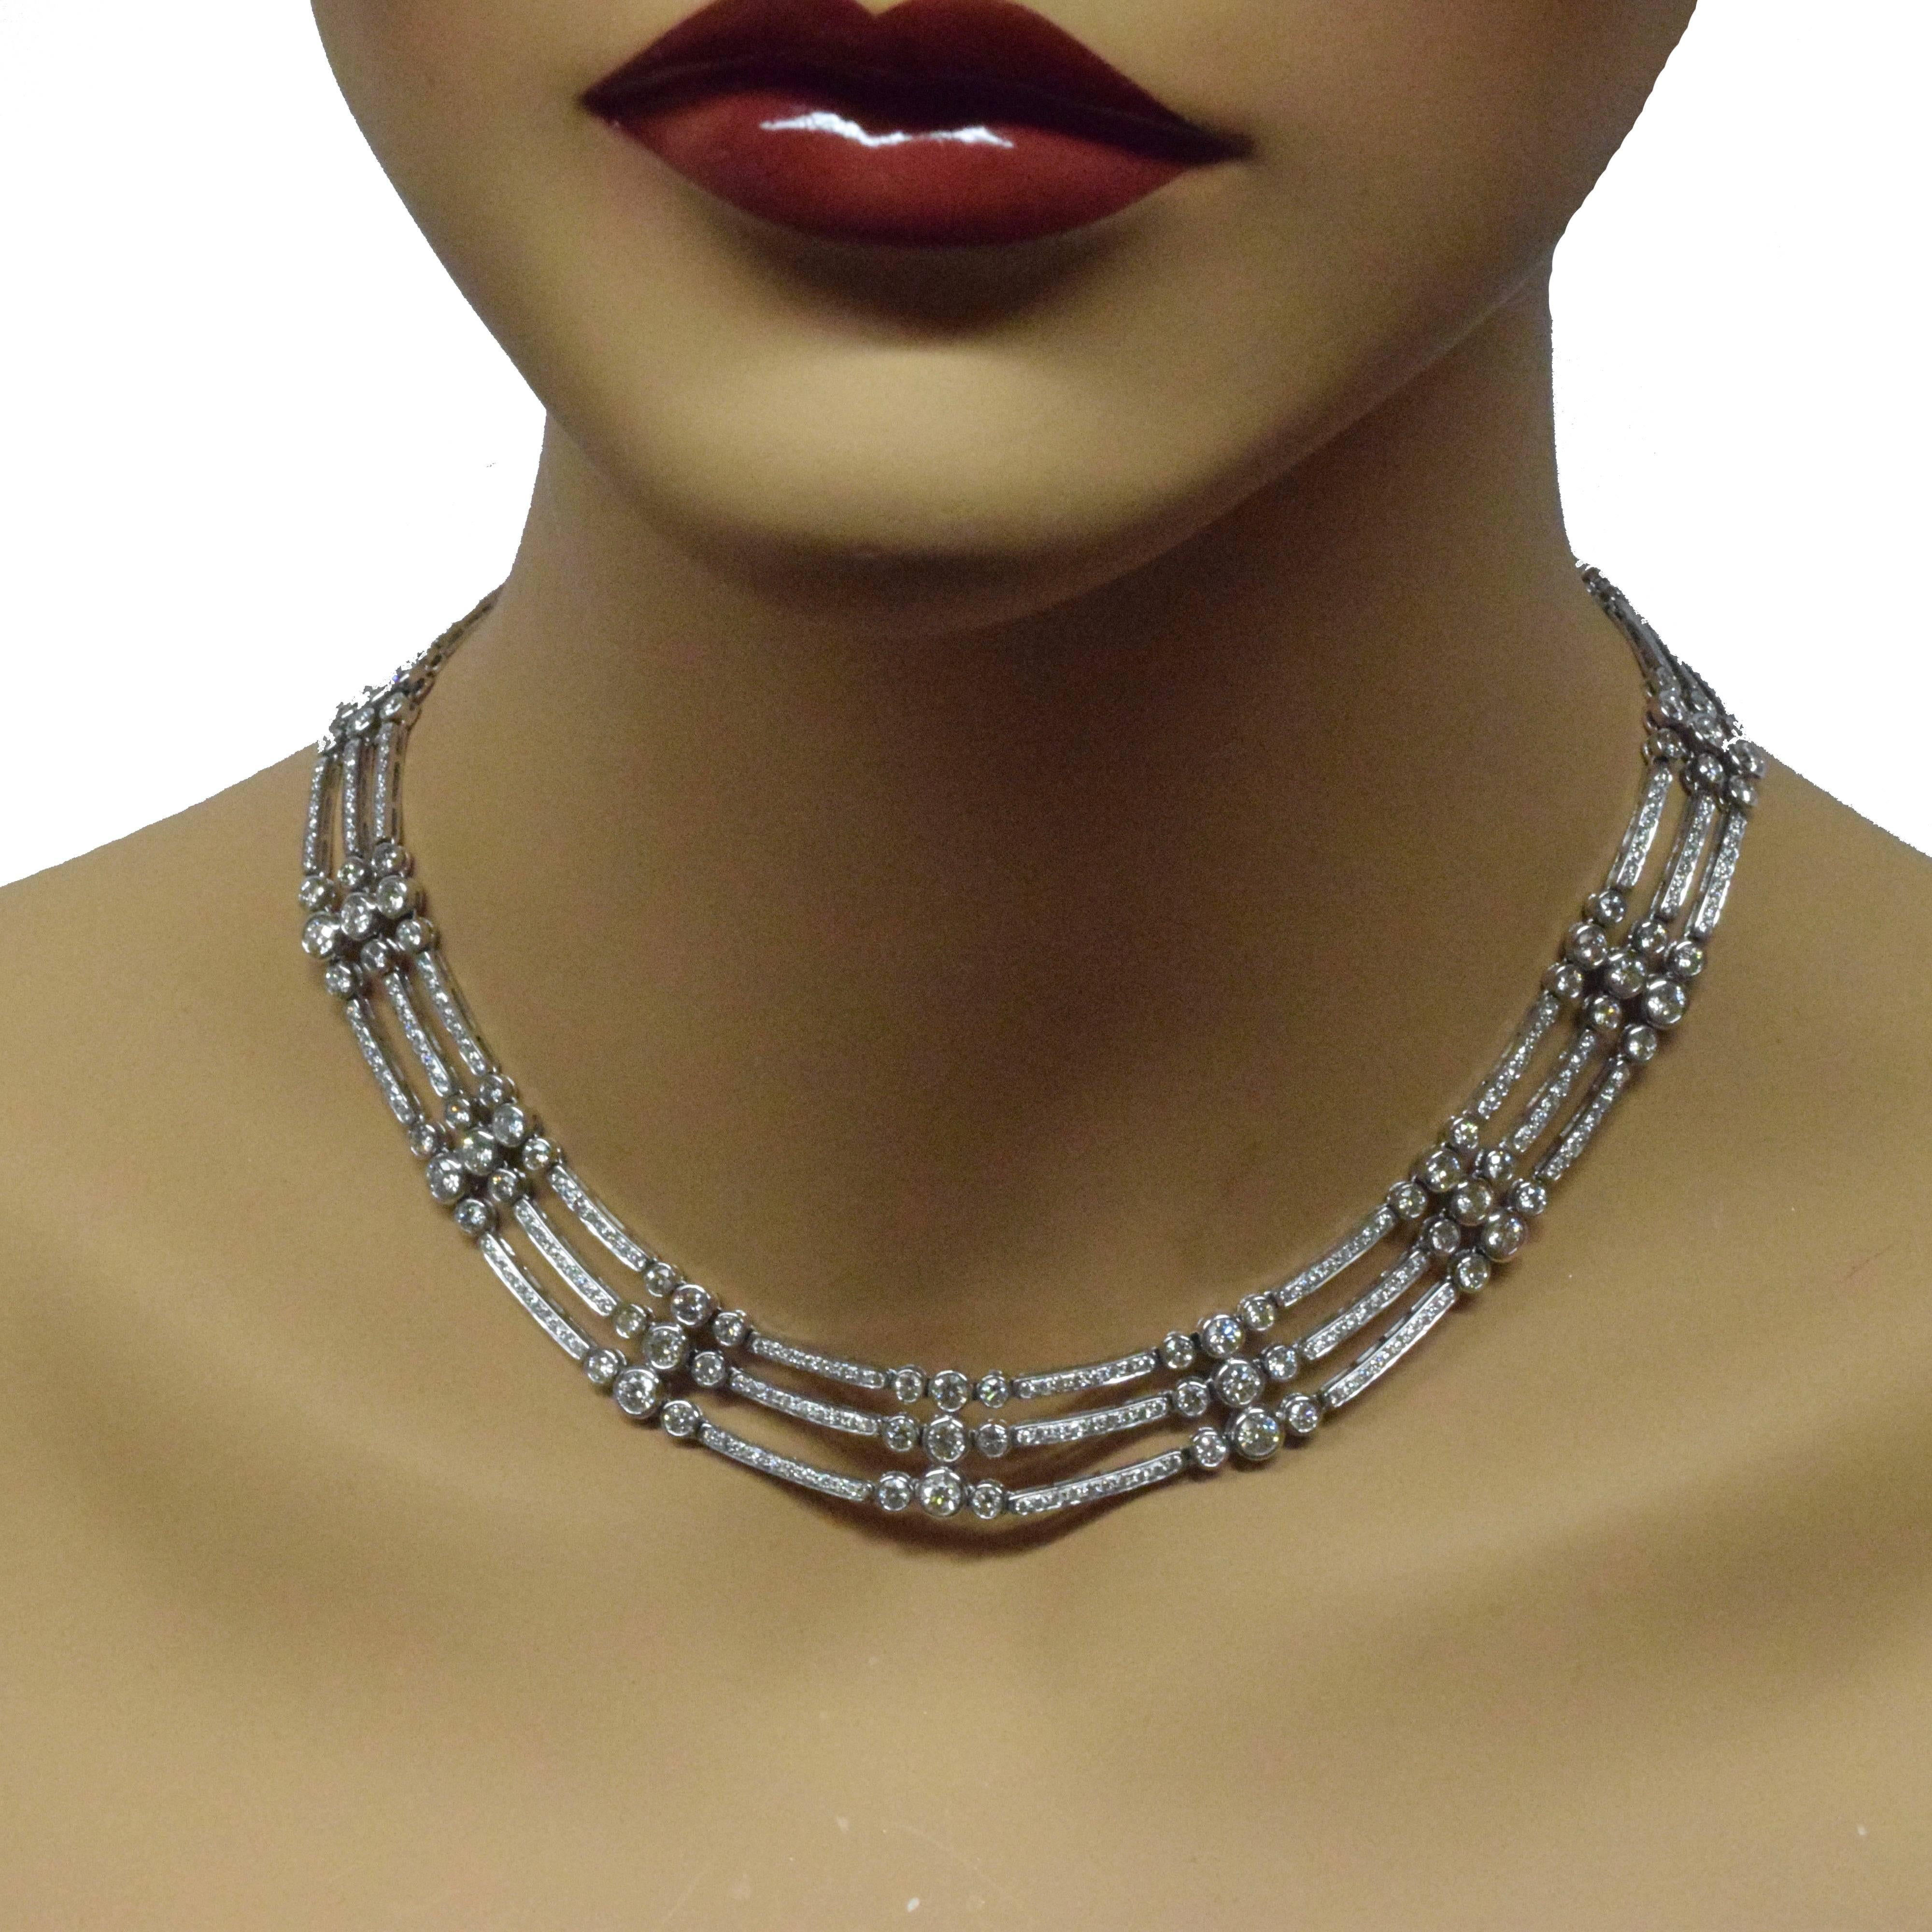 Metal: 18 Karat White Gold
Stones: 525 Round Brilliant Cut Diamonds
Total Carat Weight: 35 ct
Total Item Weight (g): 69
Necklace Length: 15 inches
Necklace Width: approx. 0.5 inches